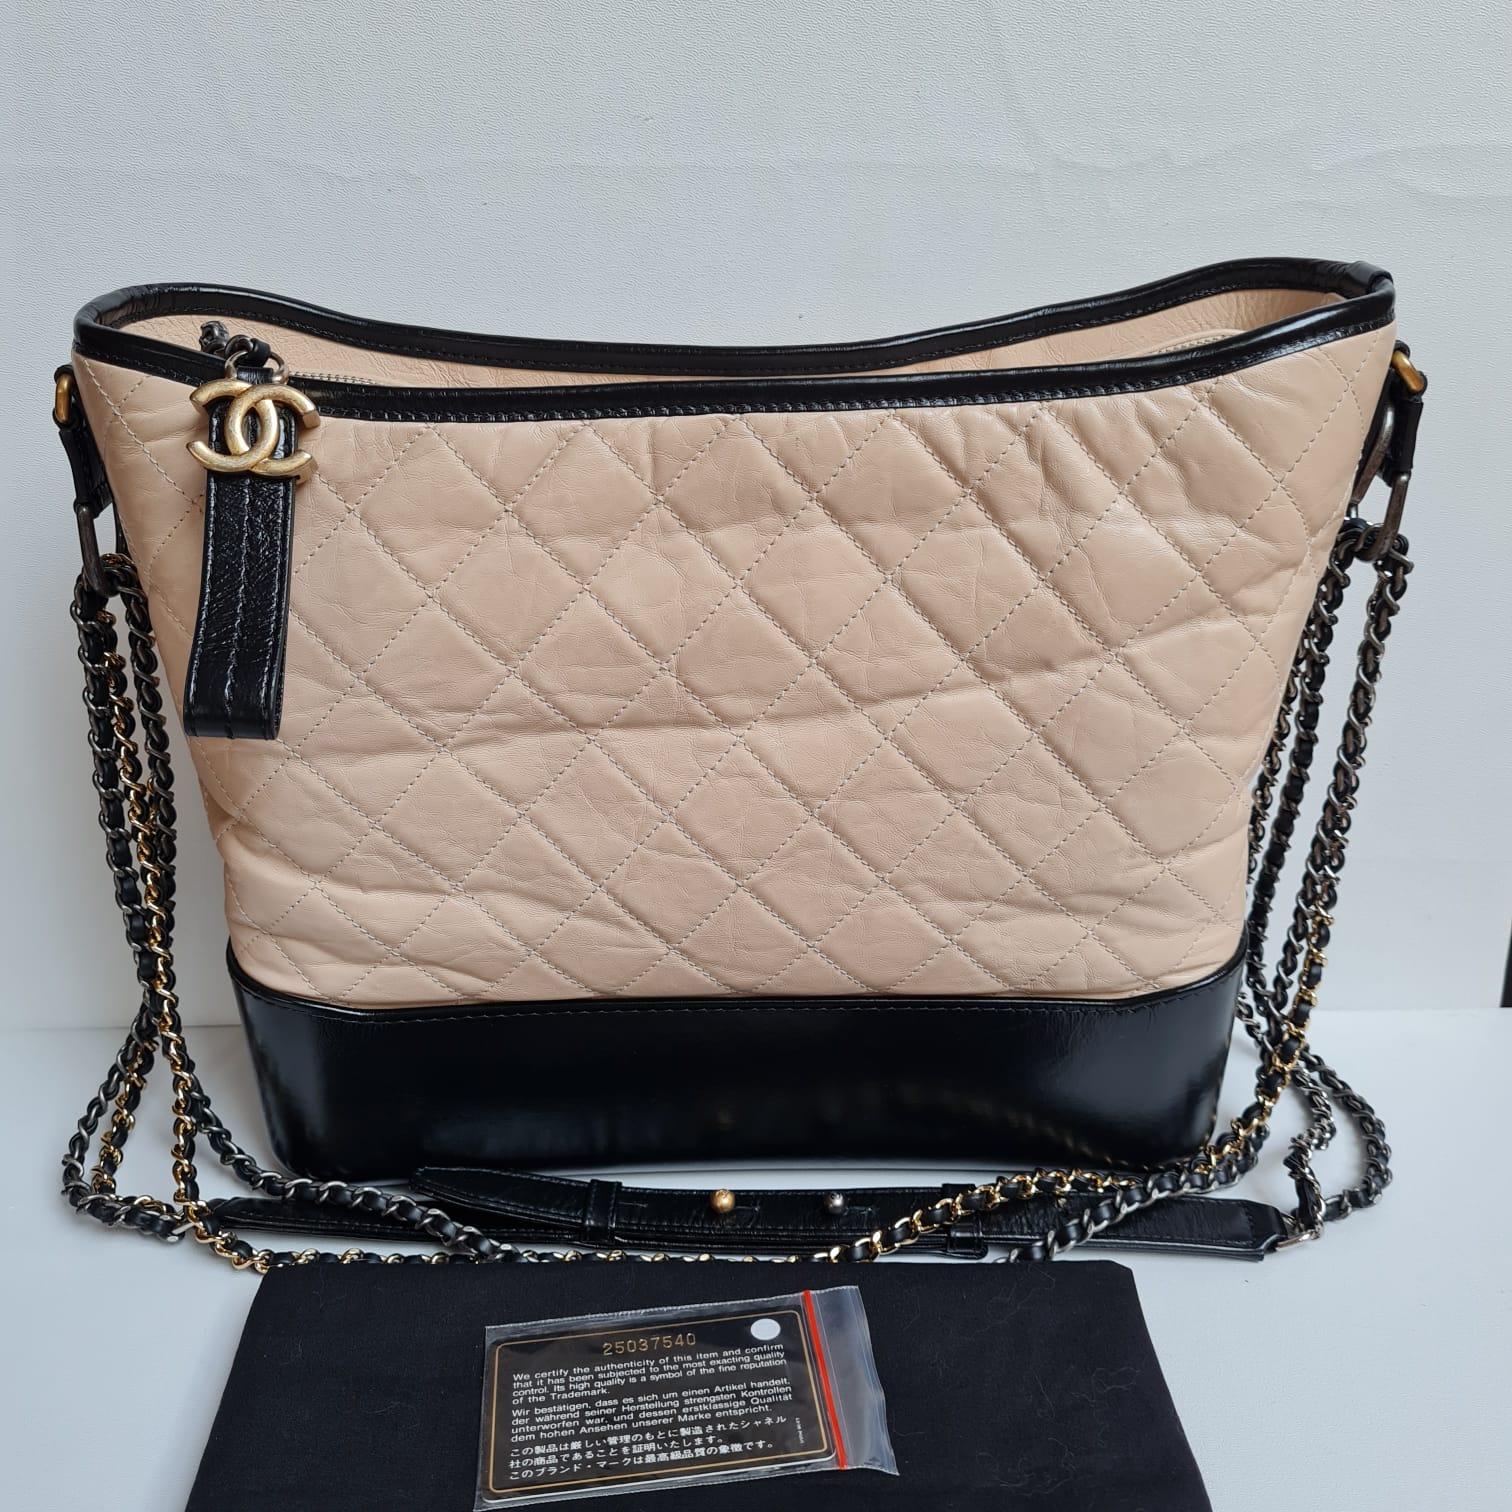 A classic gabrielle bag in large size. Beautiful condition other than the creasing on the mid section of the bag. Wont be as visible once filled up. Light marks on the bottom smooth leather. Beautiful bright pink lining. Item series #25. Comes with